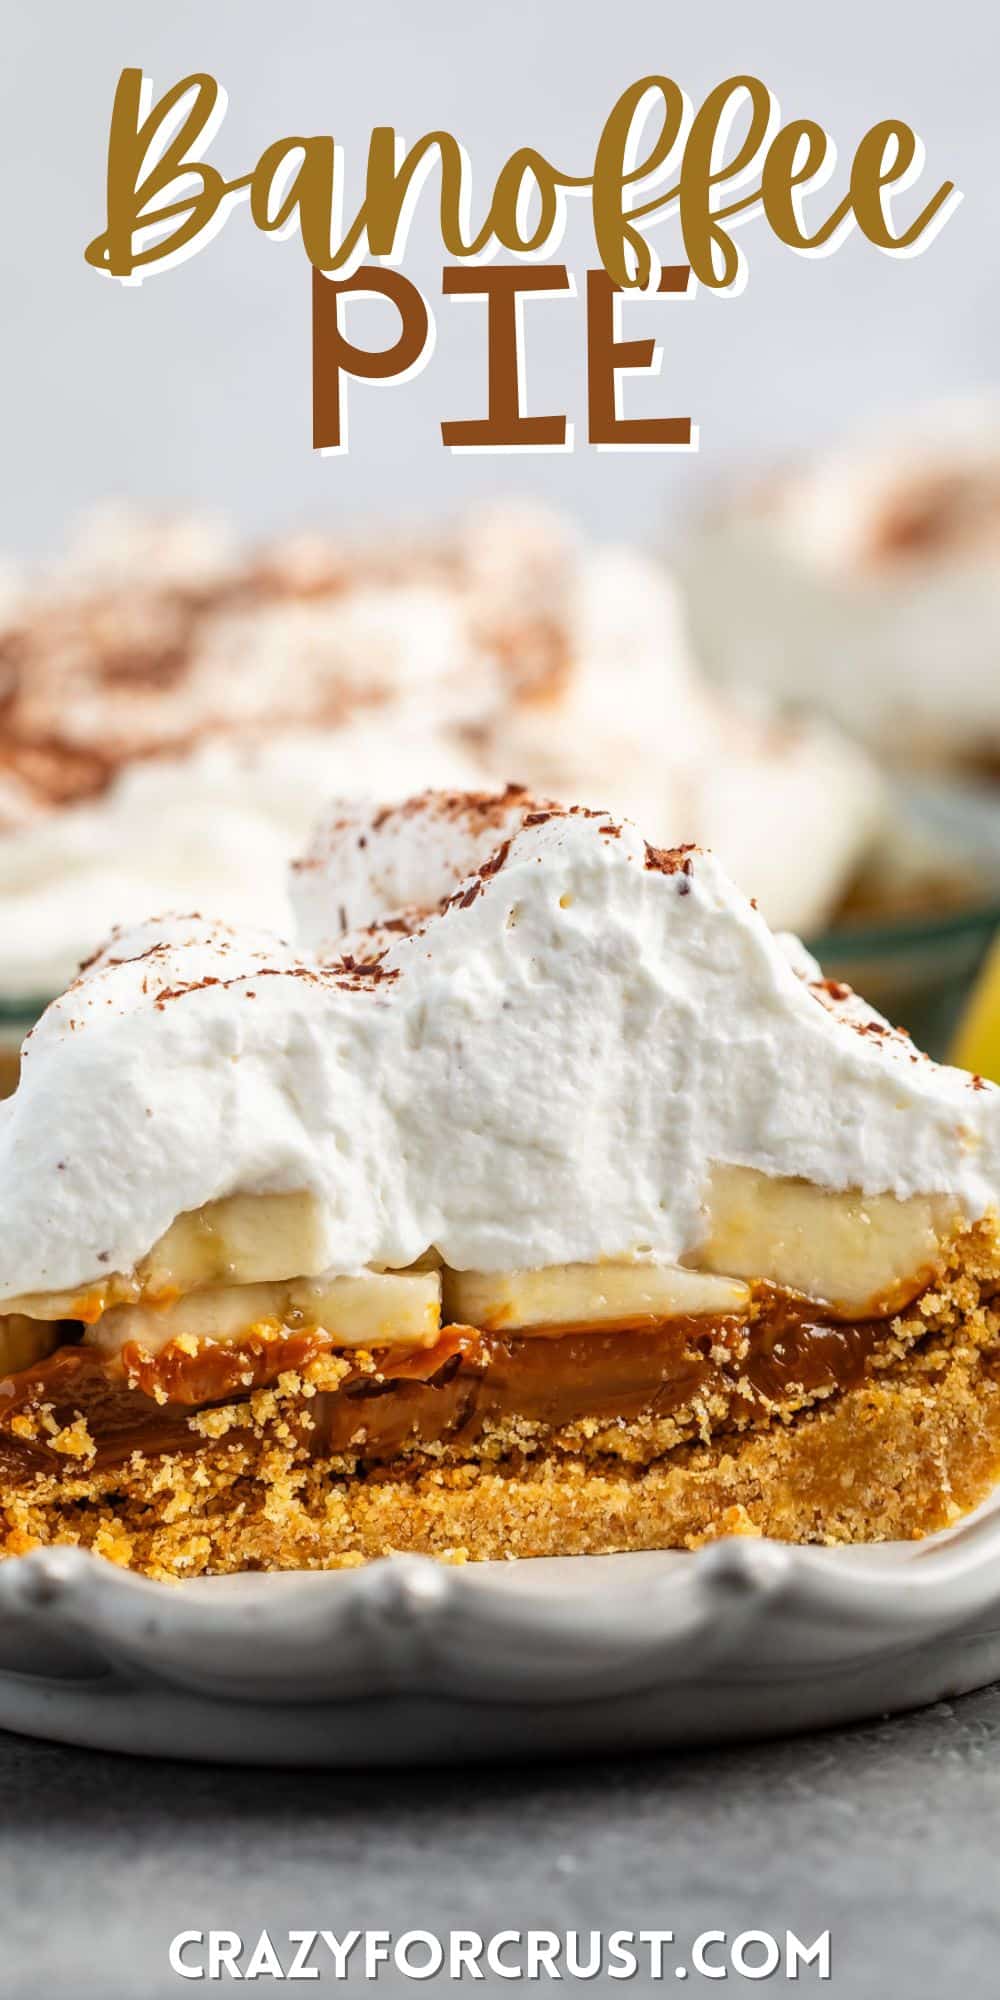 pie layered with graham cracker crust and chocolate and bananas and whipped cream on a white plate with words on the image.